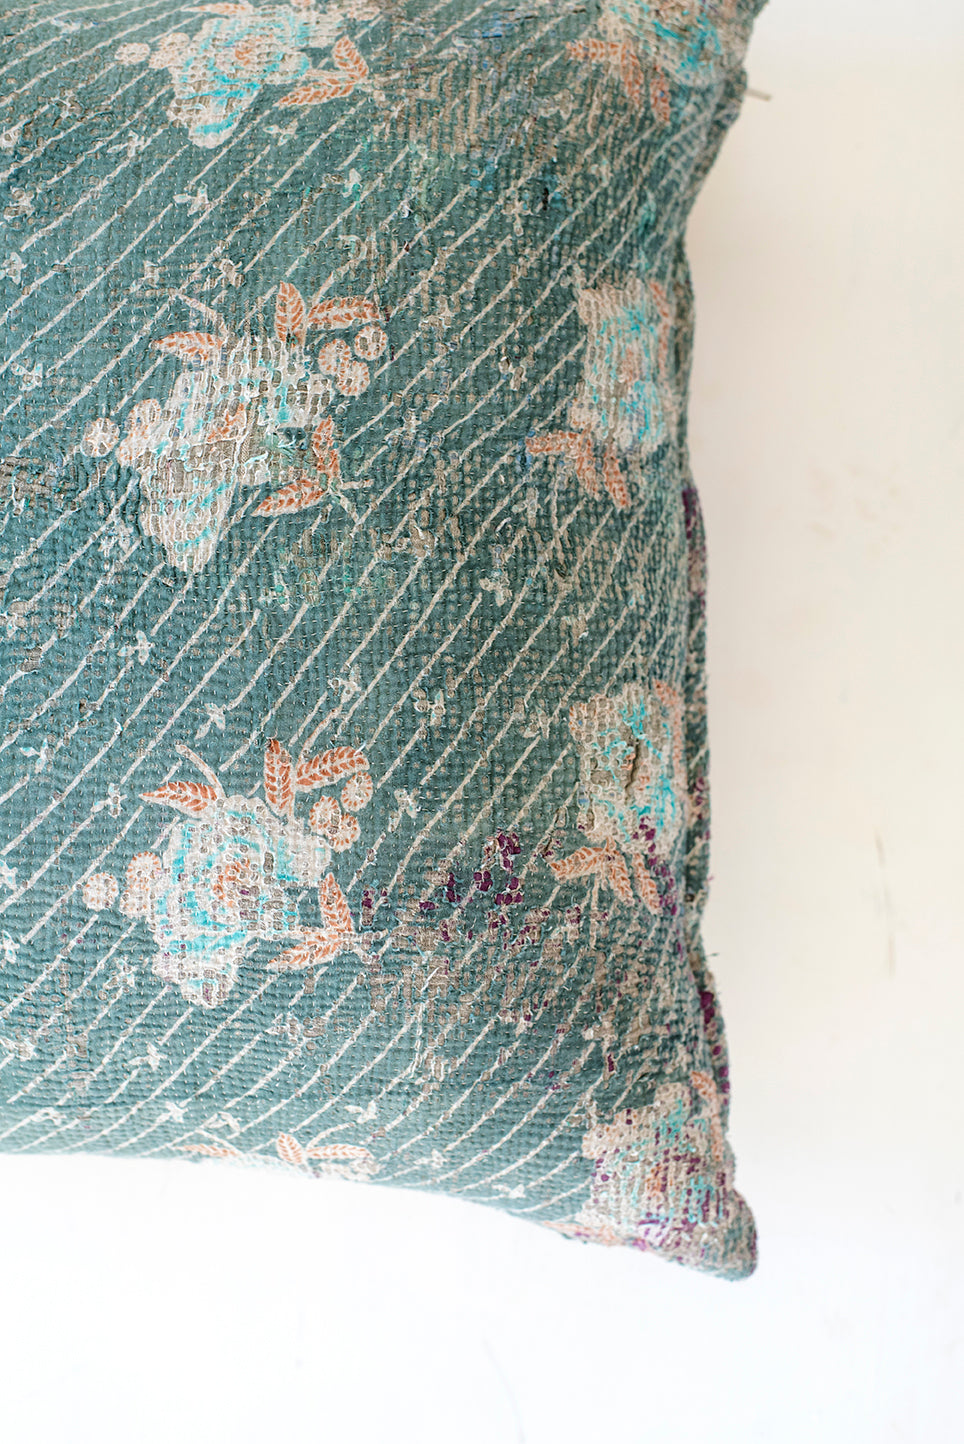 Vintage Kantha Pillow Cover + Insert Turquoise Blooms 18x18